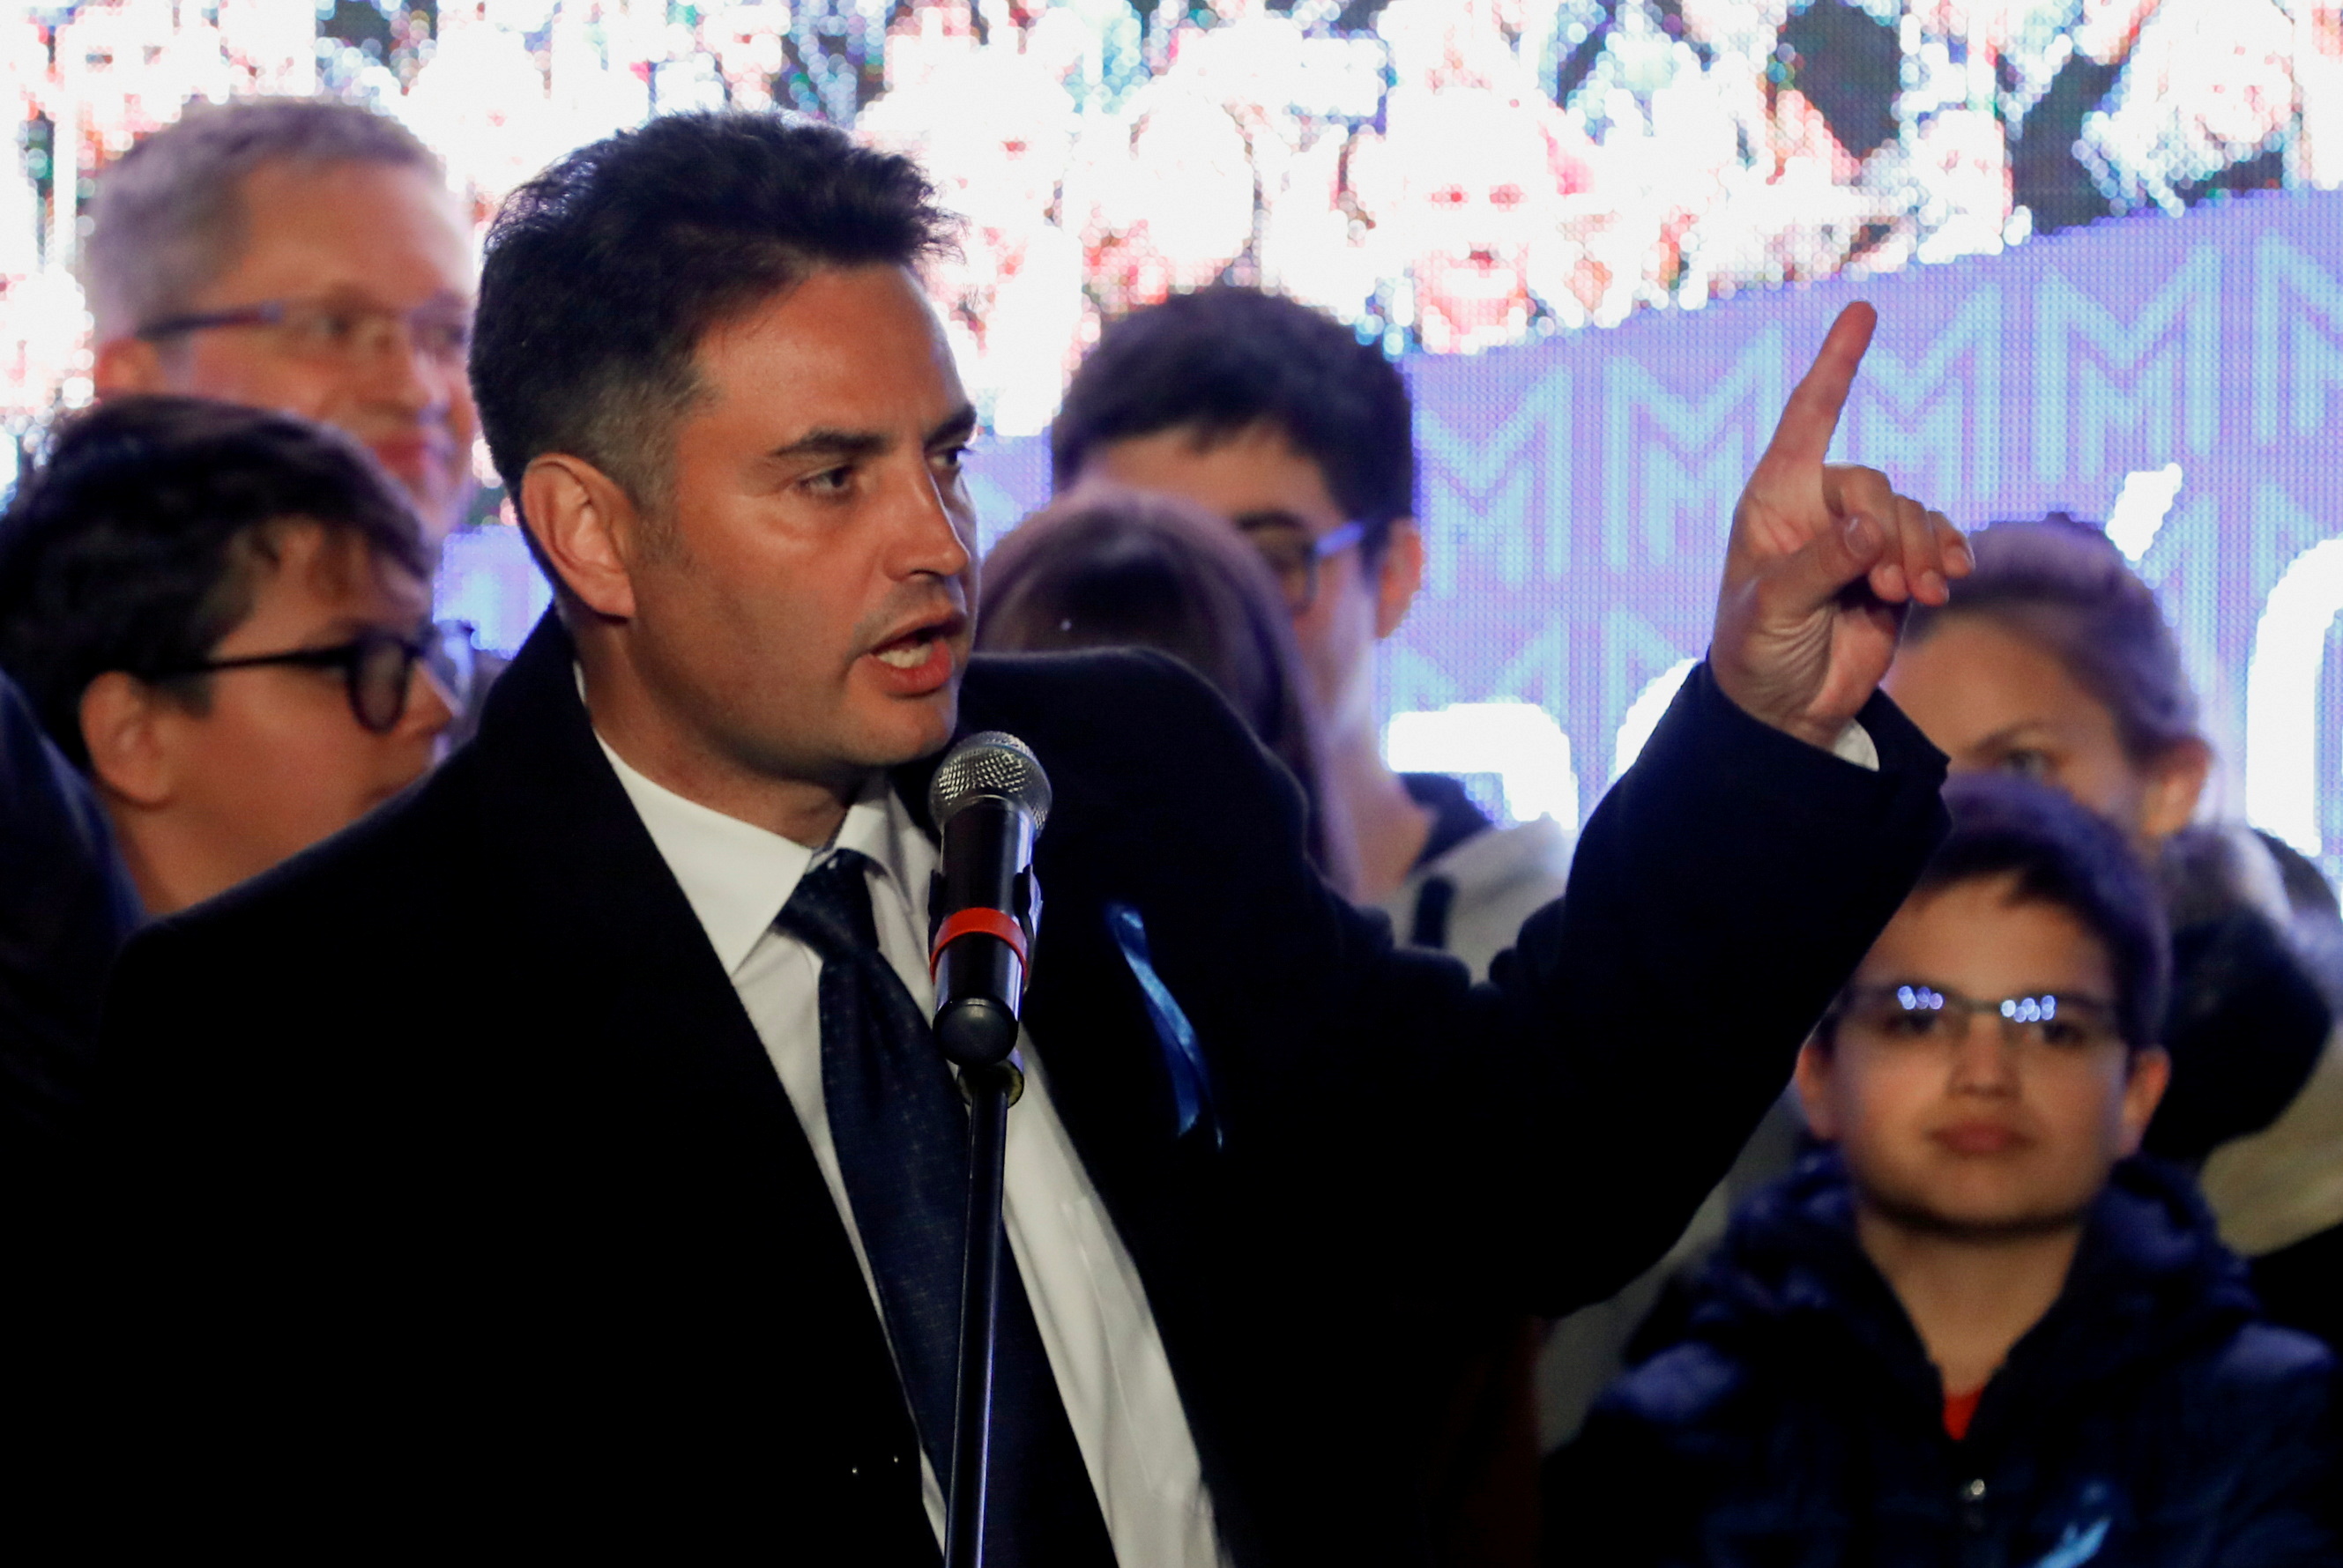 Opposition candidate for prime minister Peter Marki-Zay gestures as he speaks at the election headquarters after the opposition primary election in Budapest, Hungary, October 17, 2021. REUTERS/Bernadett Szabo